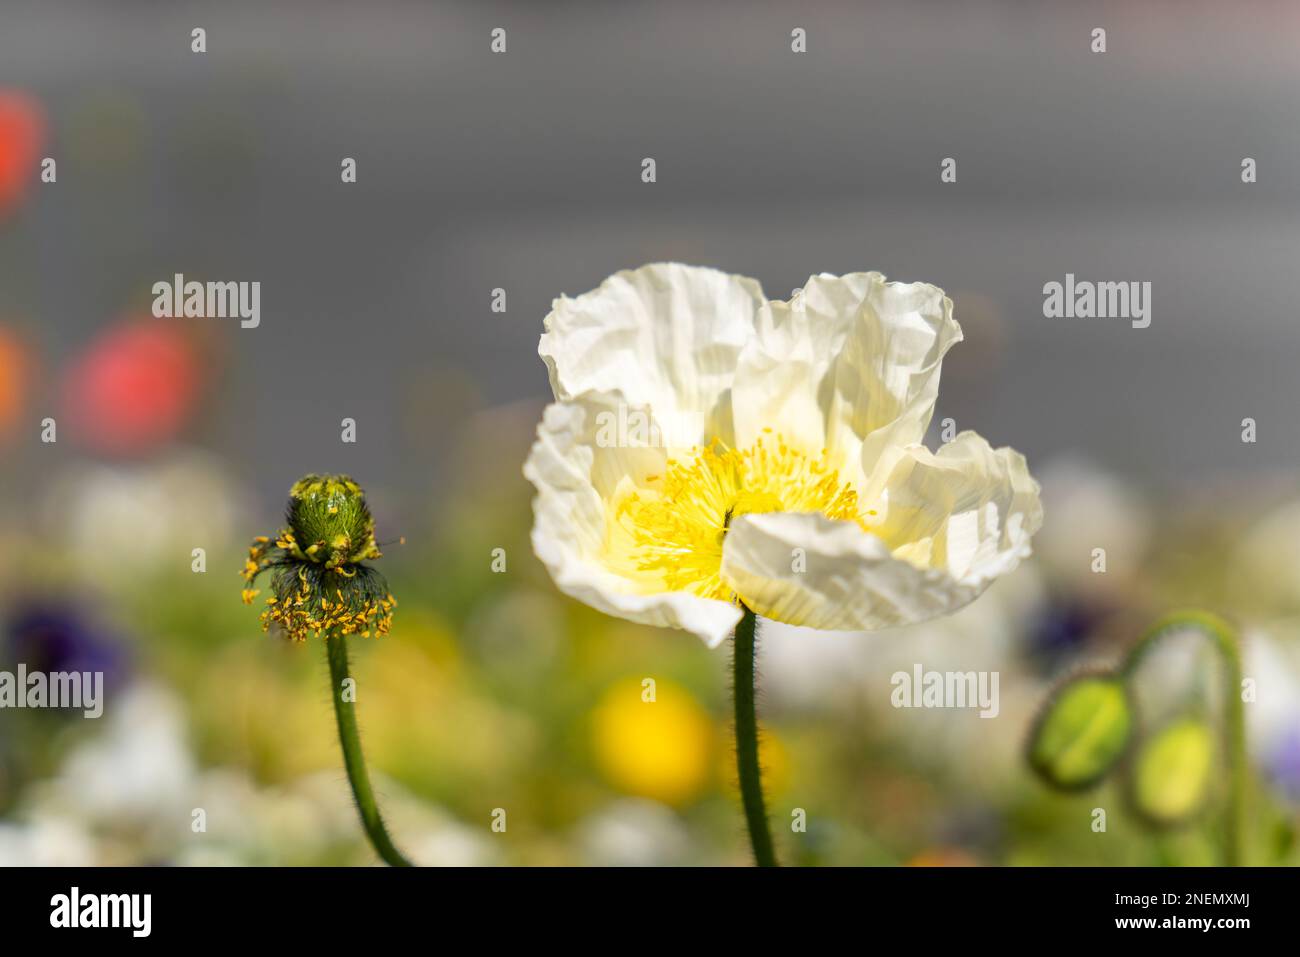 Colorful iceland poppy flowers. Papaver nudicaule. The large,cup shaped blooms have a texture like crepe paper. Stock Photo